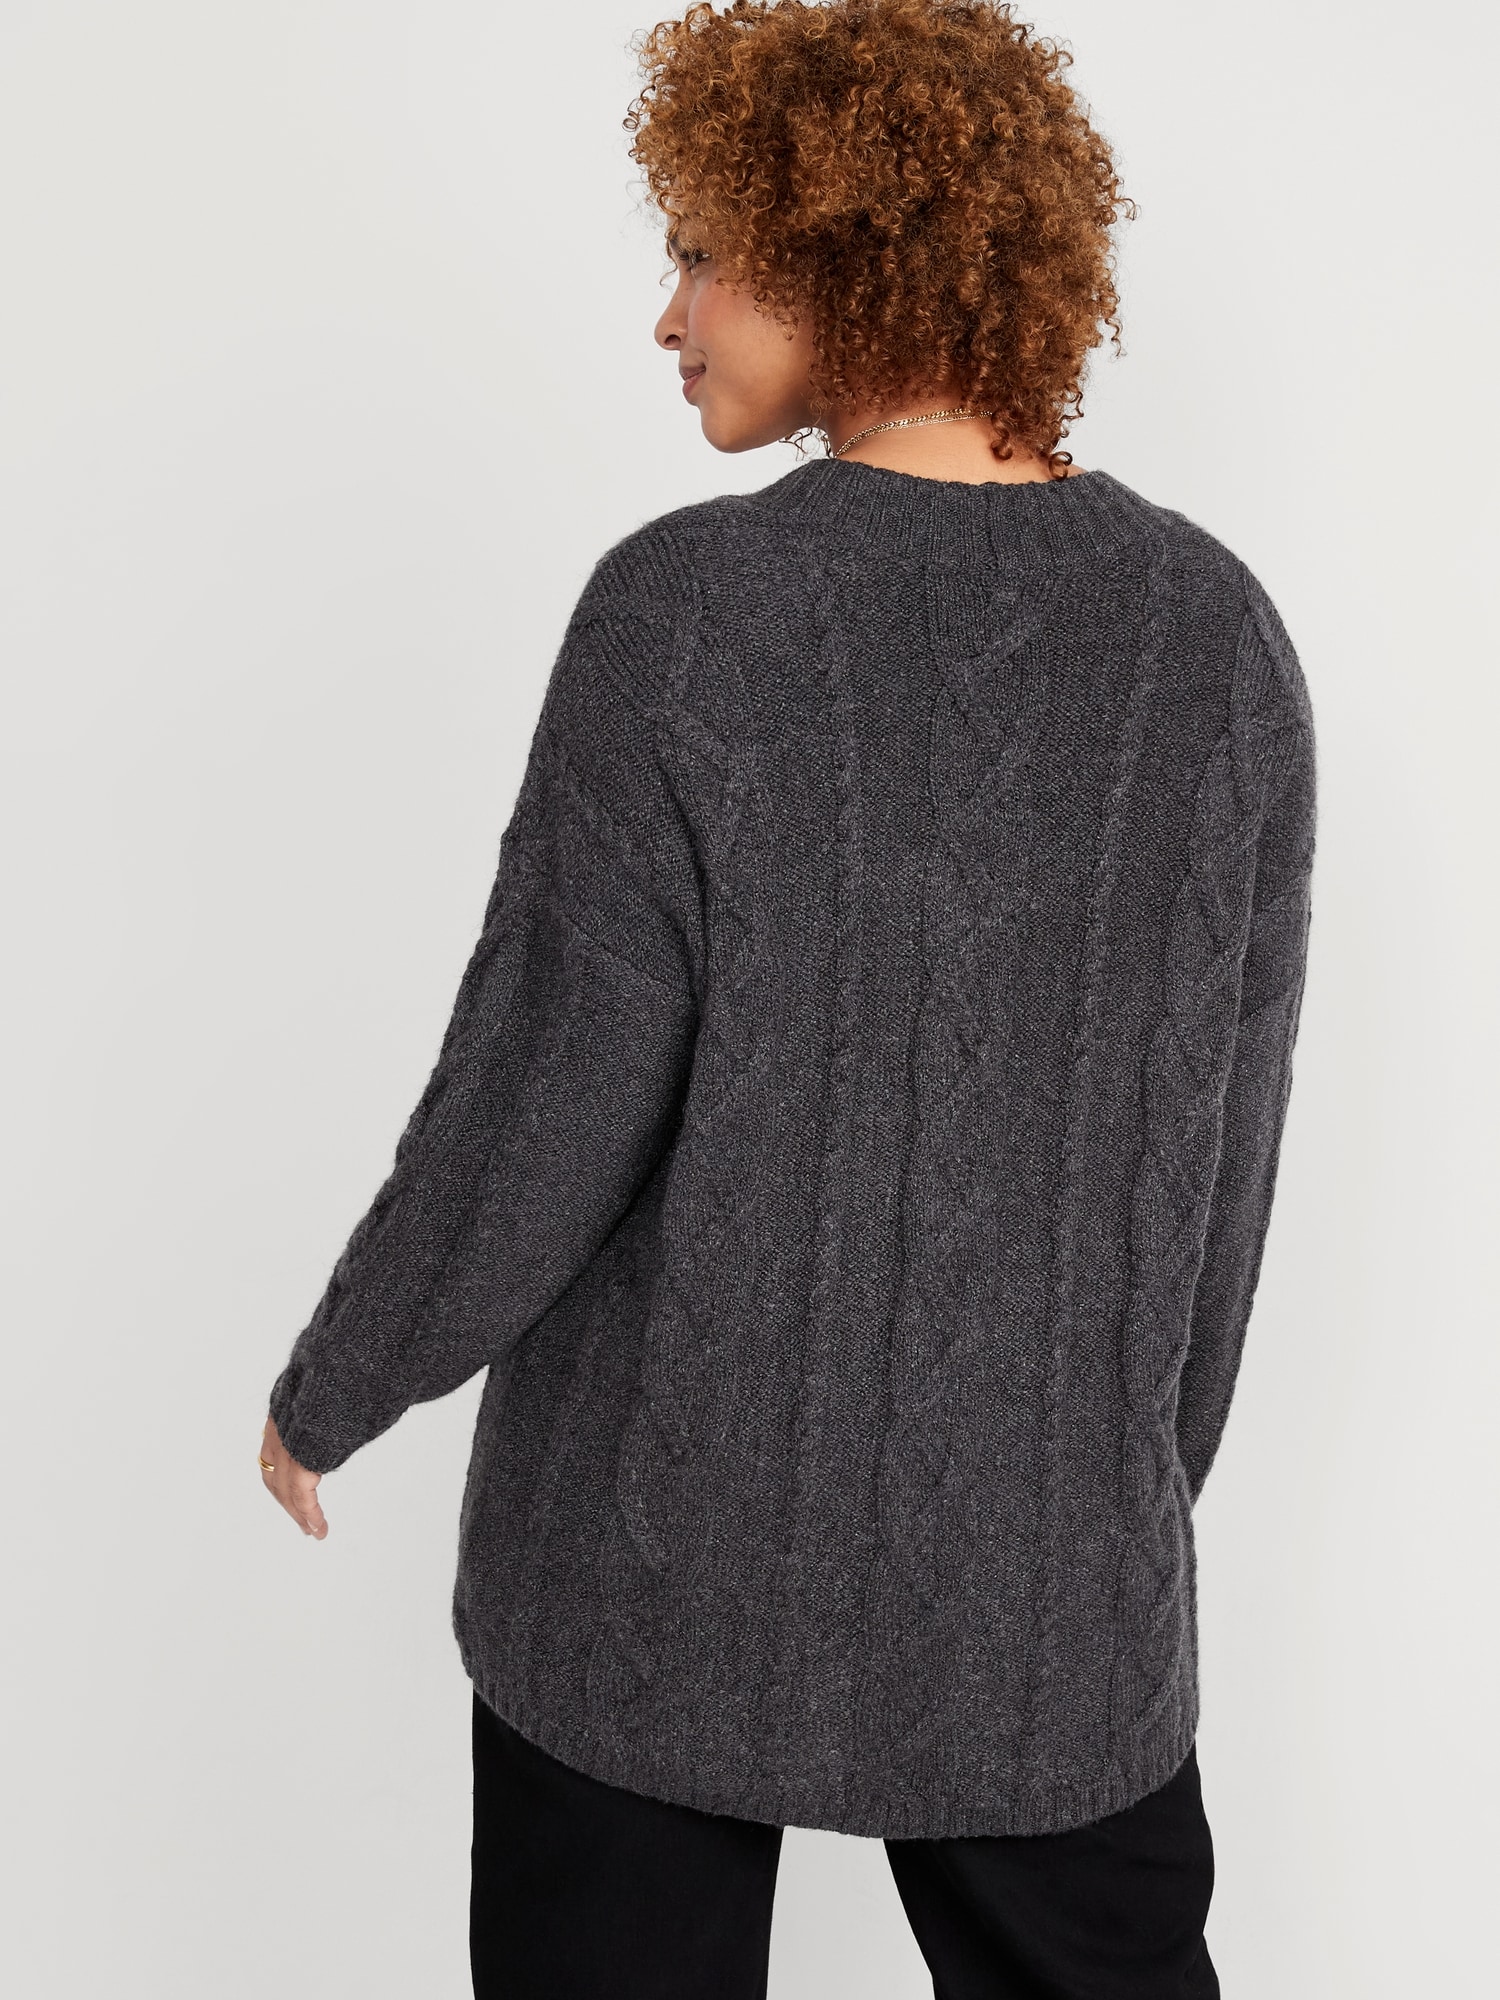 Women for | Oversized Chunky Navy Old Cardigan Cable-Knit Sweater